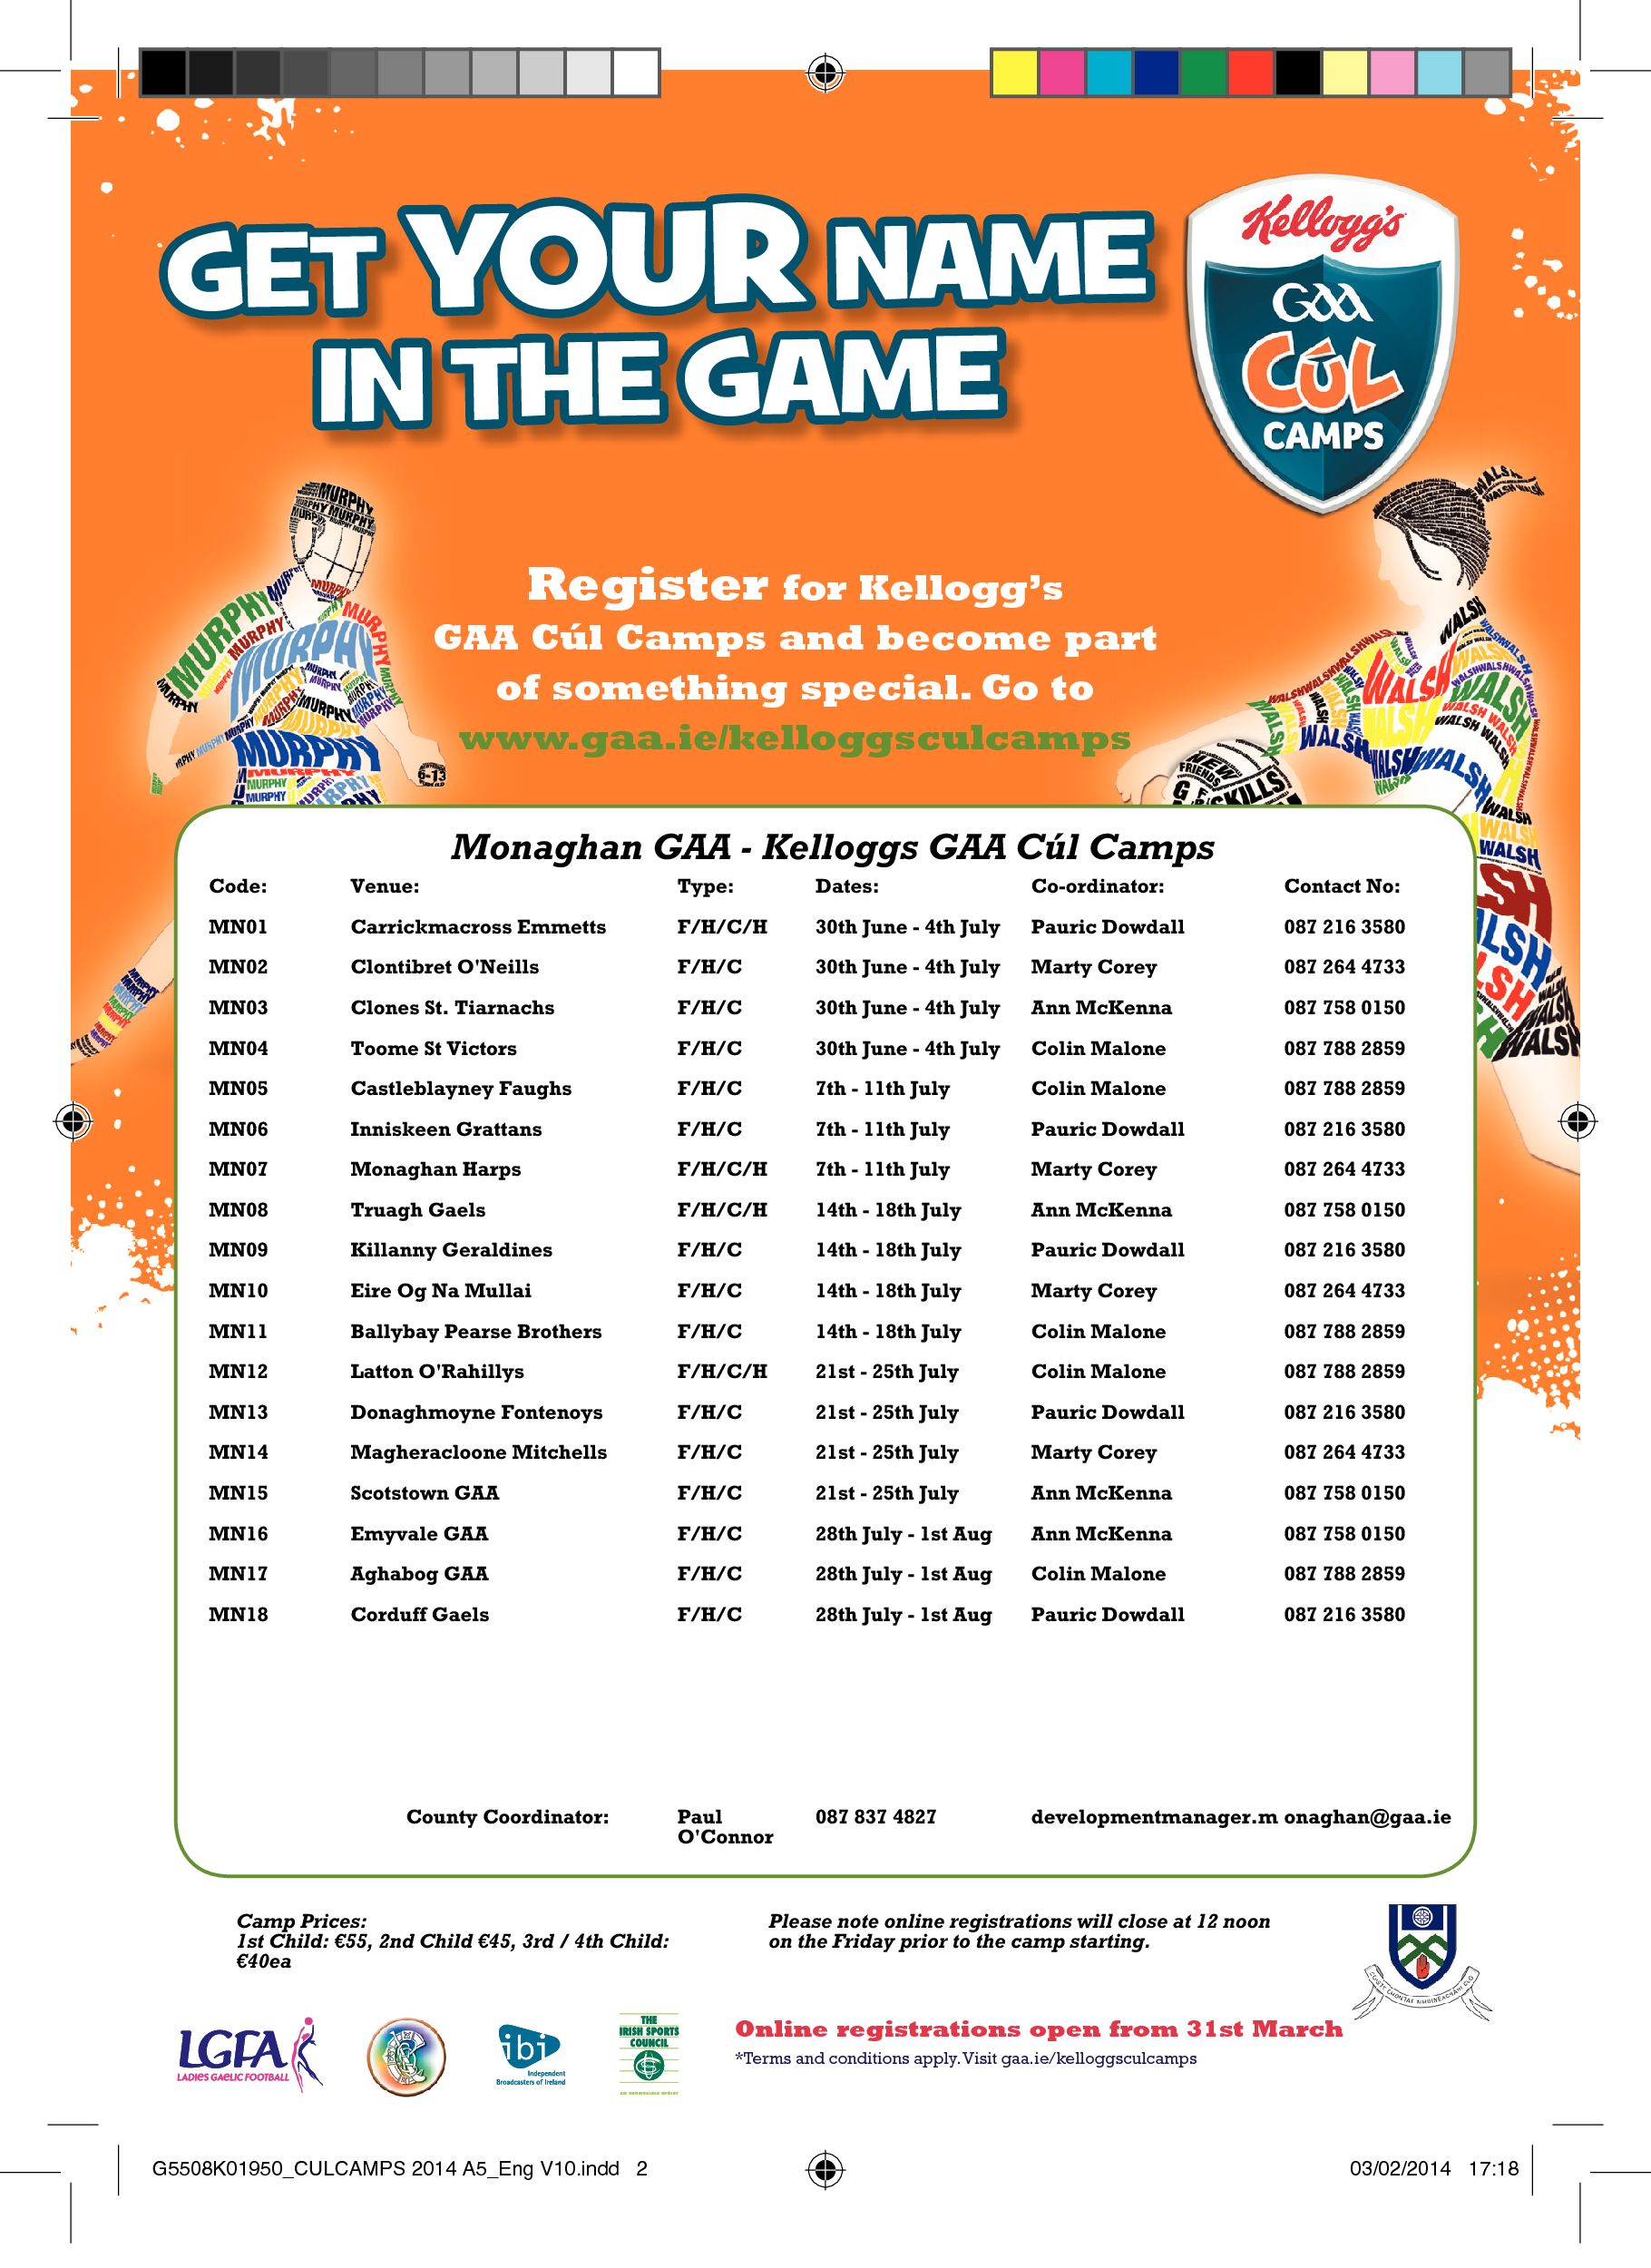 Kellogg’s Cúl Camps 2014 – GET YOUR NAME IN THE GAME!